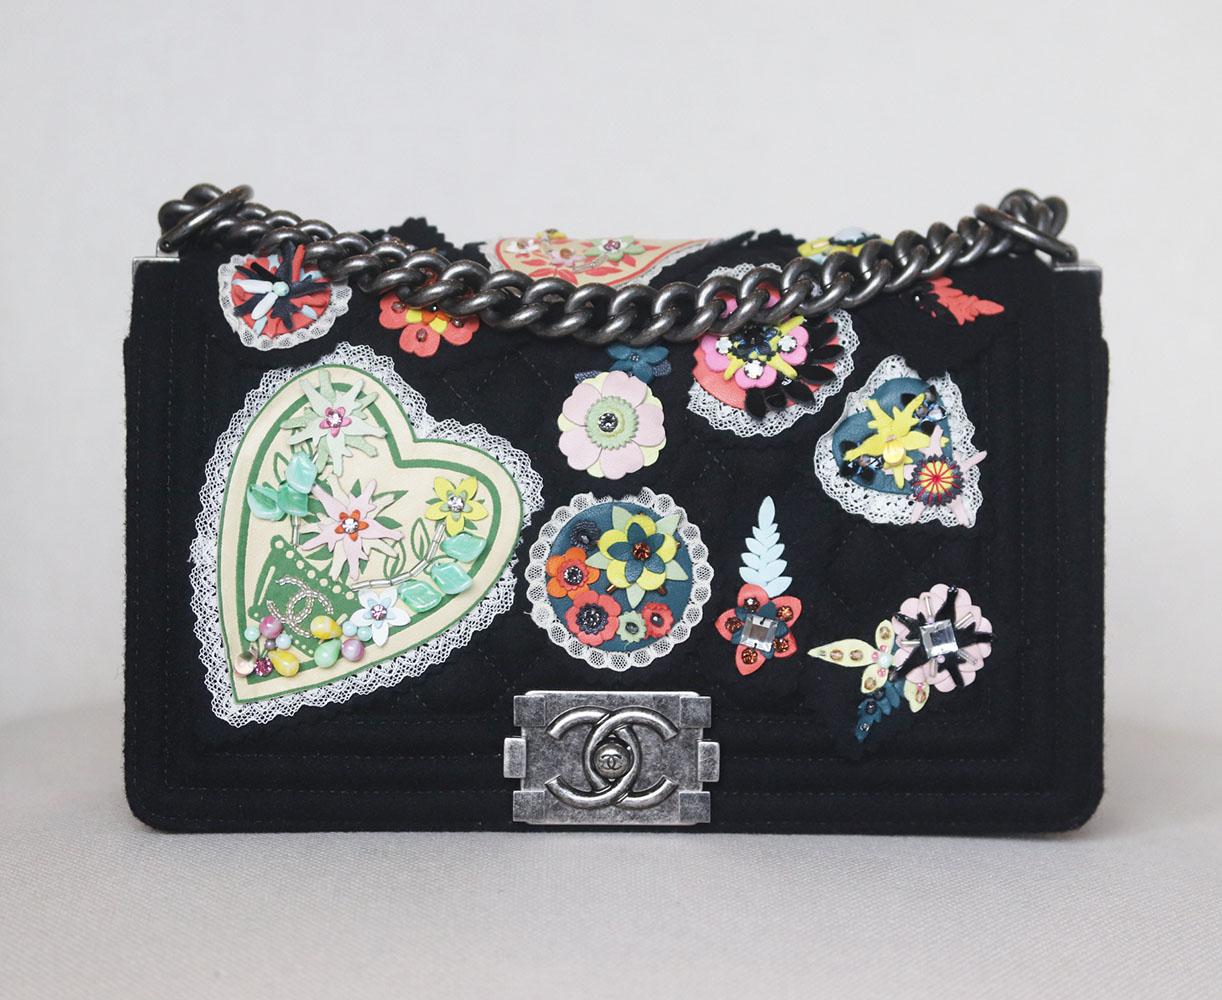 Chanel Paris-Salzburg 2015 Embroidered Quilted Felt Medium Boy Flap Bag has been hand-finished by skilled artisans in the label's workshop, it is boasting a embroidered quilted felt exterior, this design is accented with gunmetal-toned and black